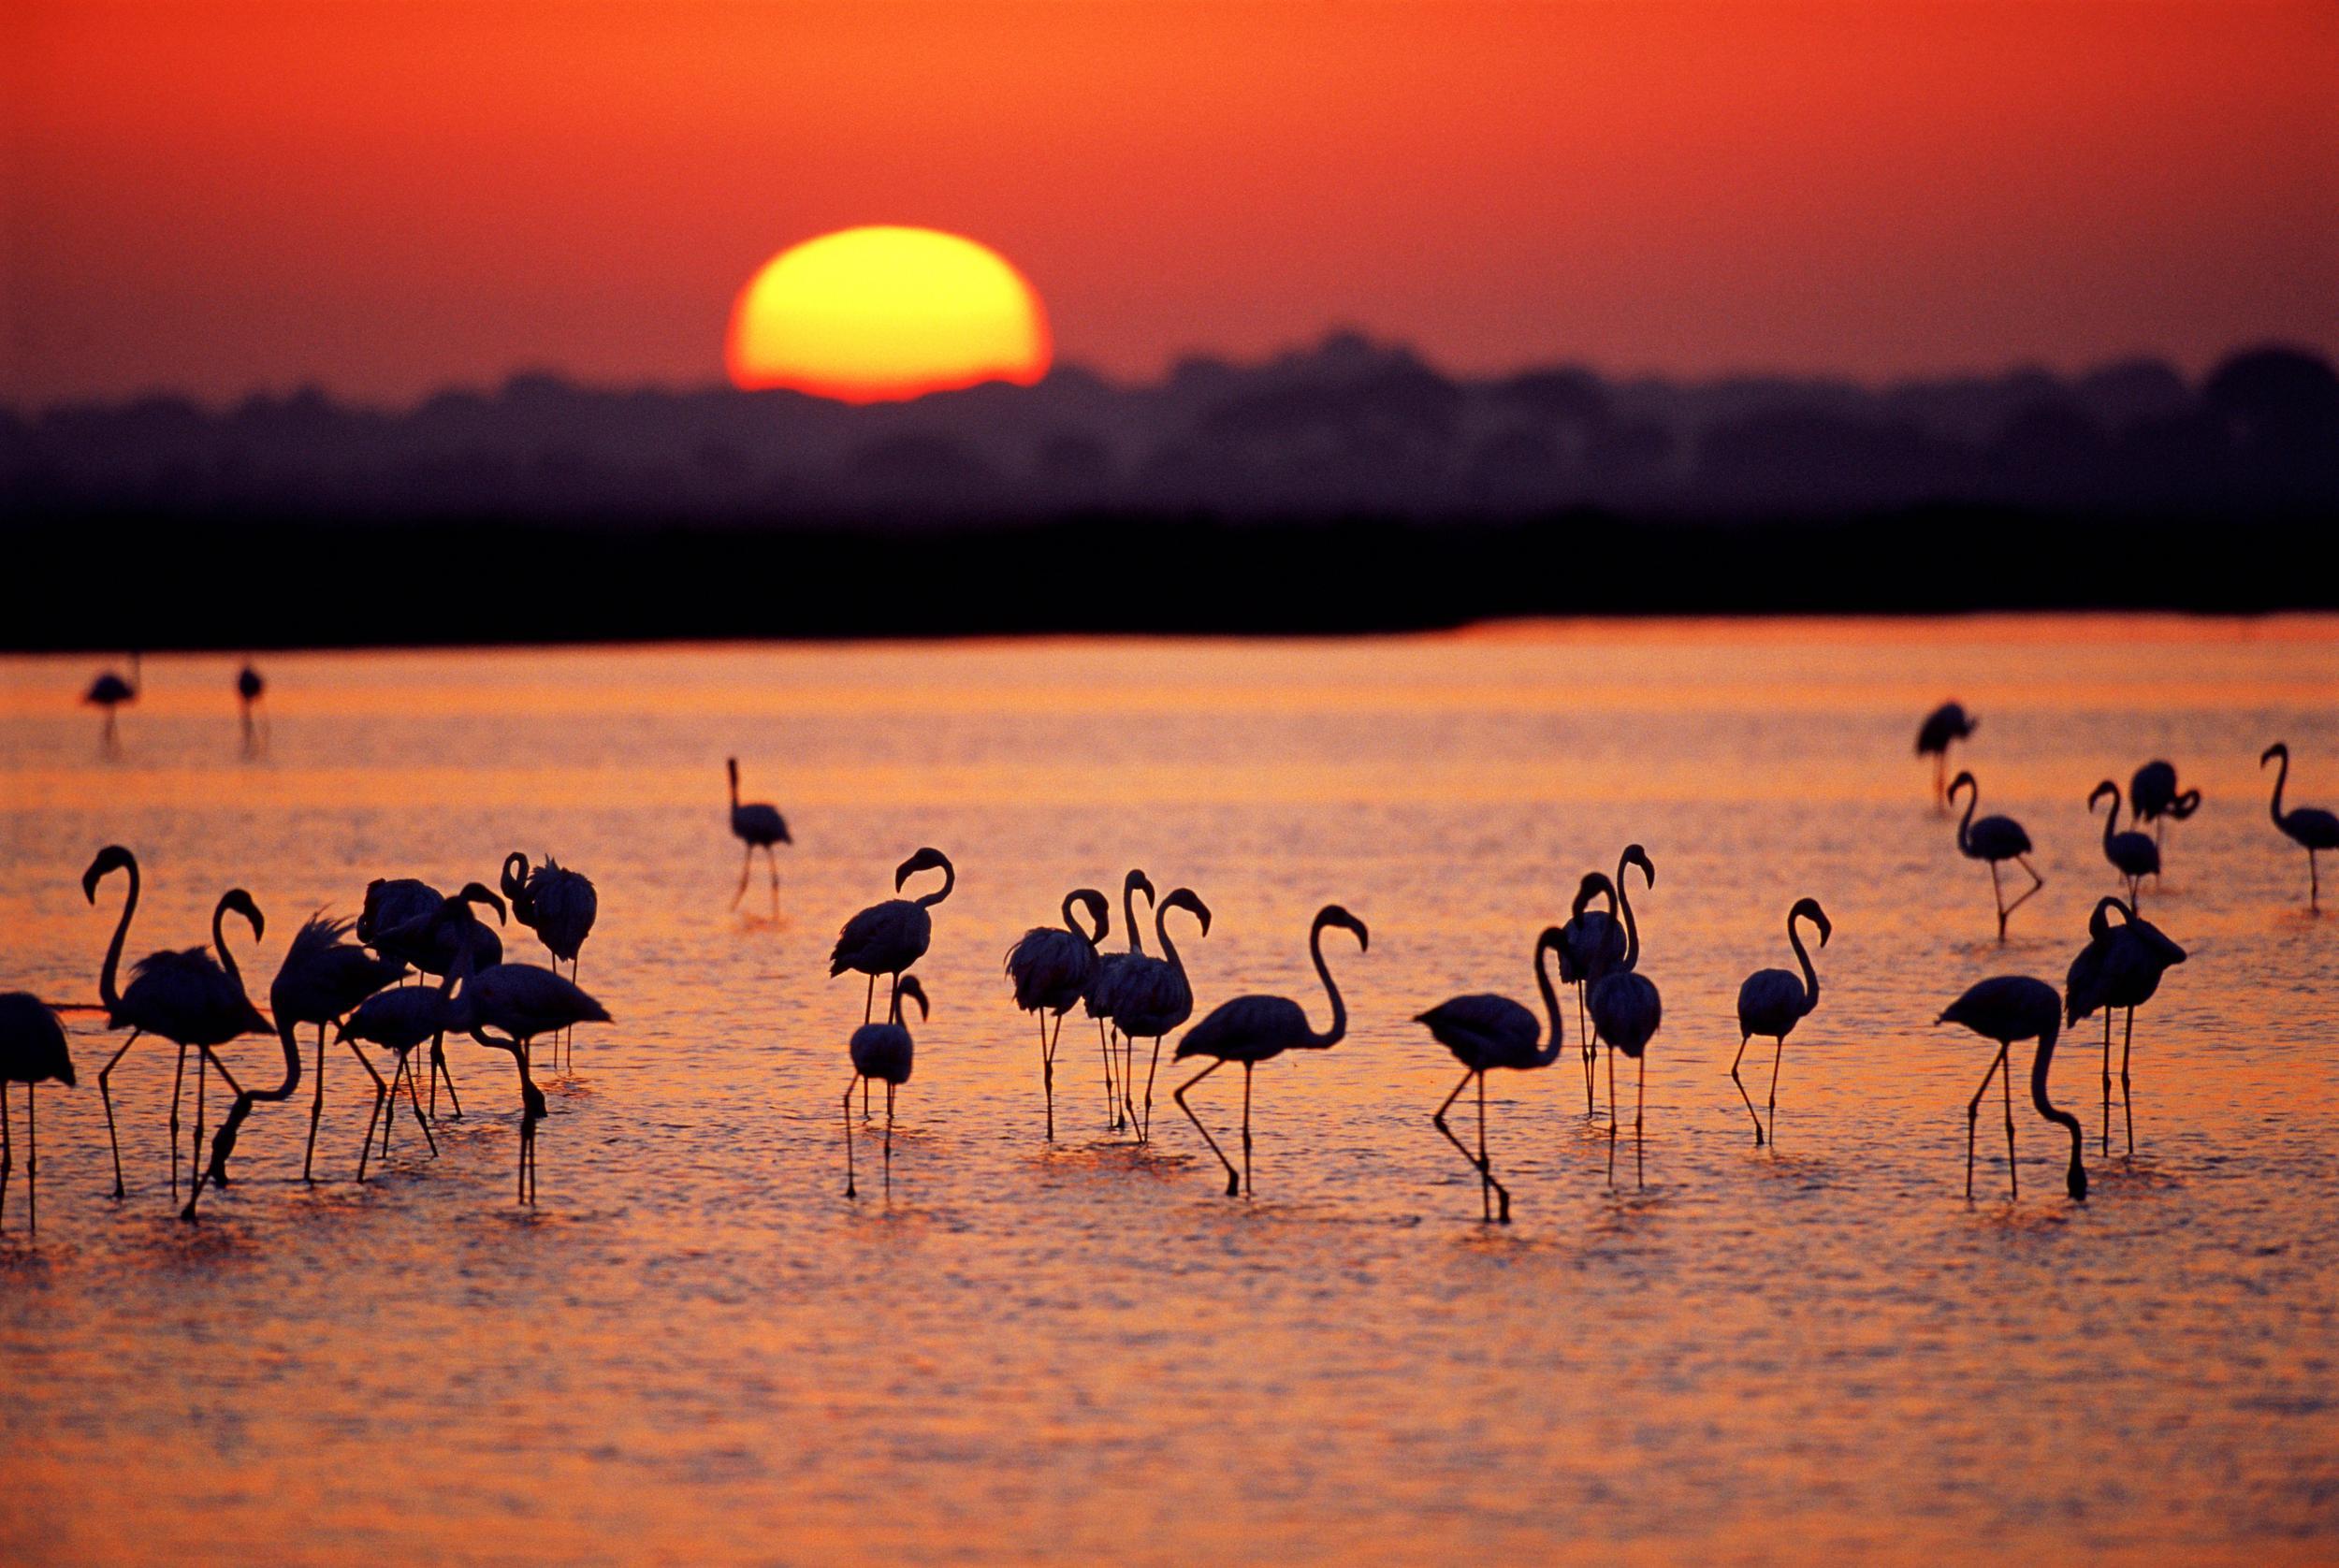 The national park is home to thousands of species such as flamingos